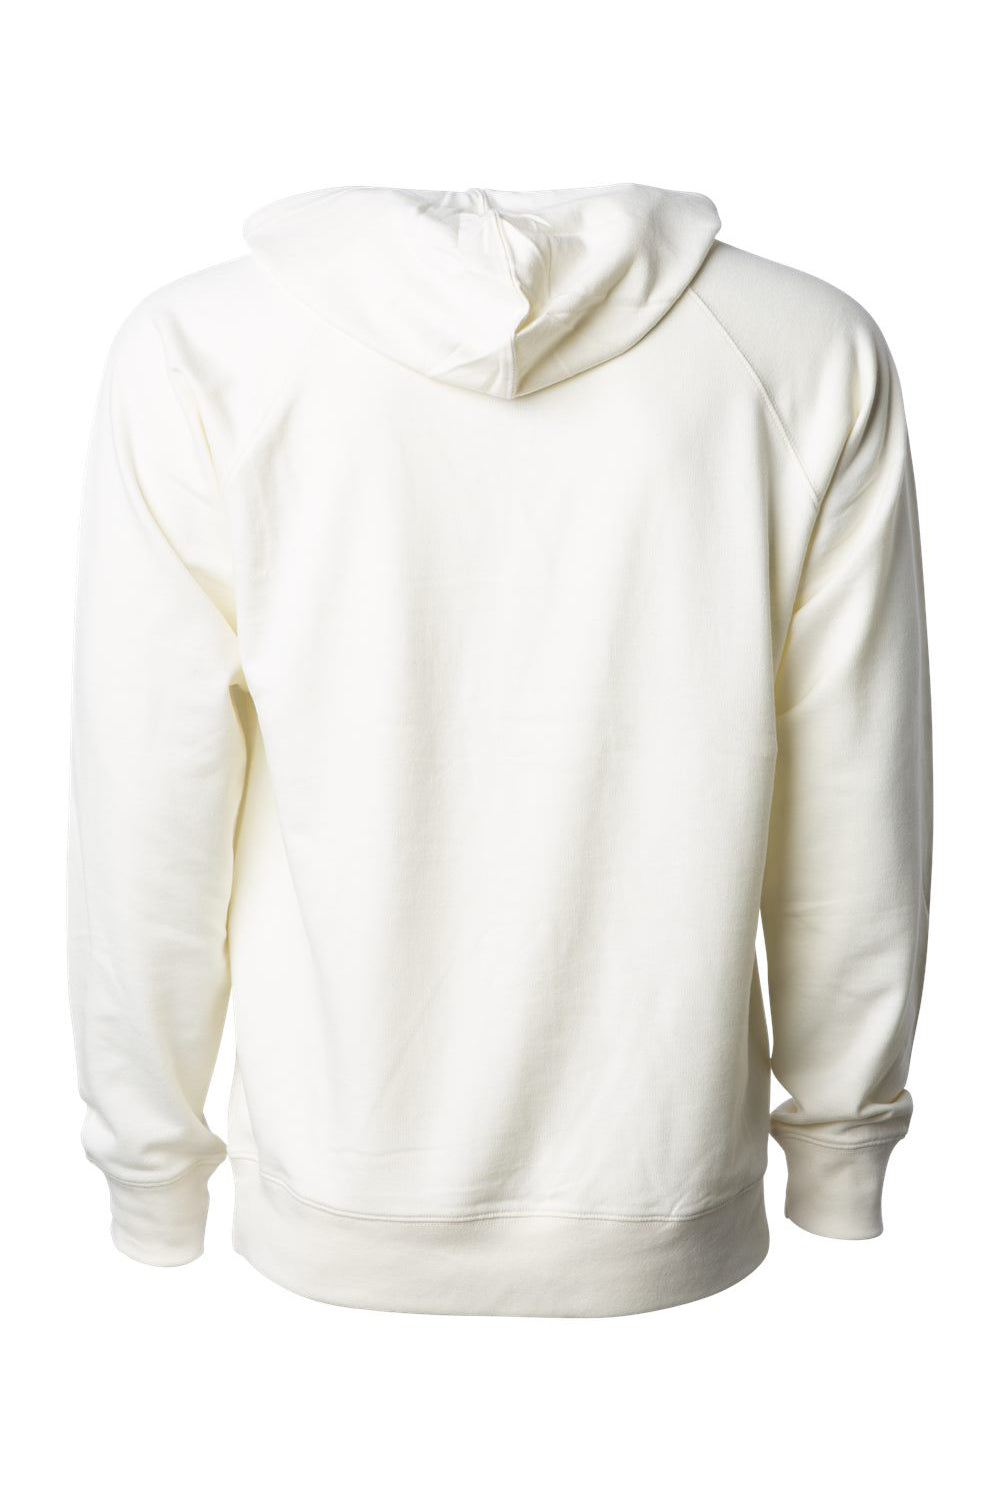 Independent Trading Co. SS1000 Mens Icon Loopback Terry Hooded Sweatshirt Hoodie Bone Flat Back